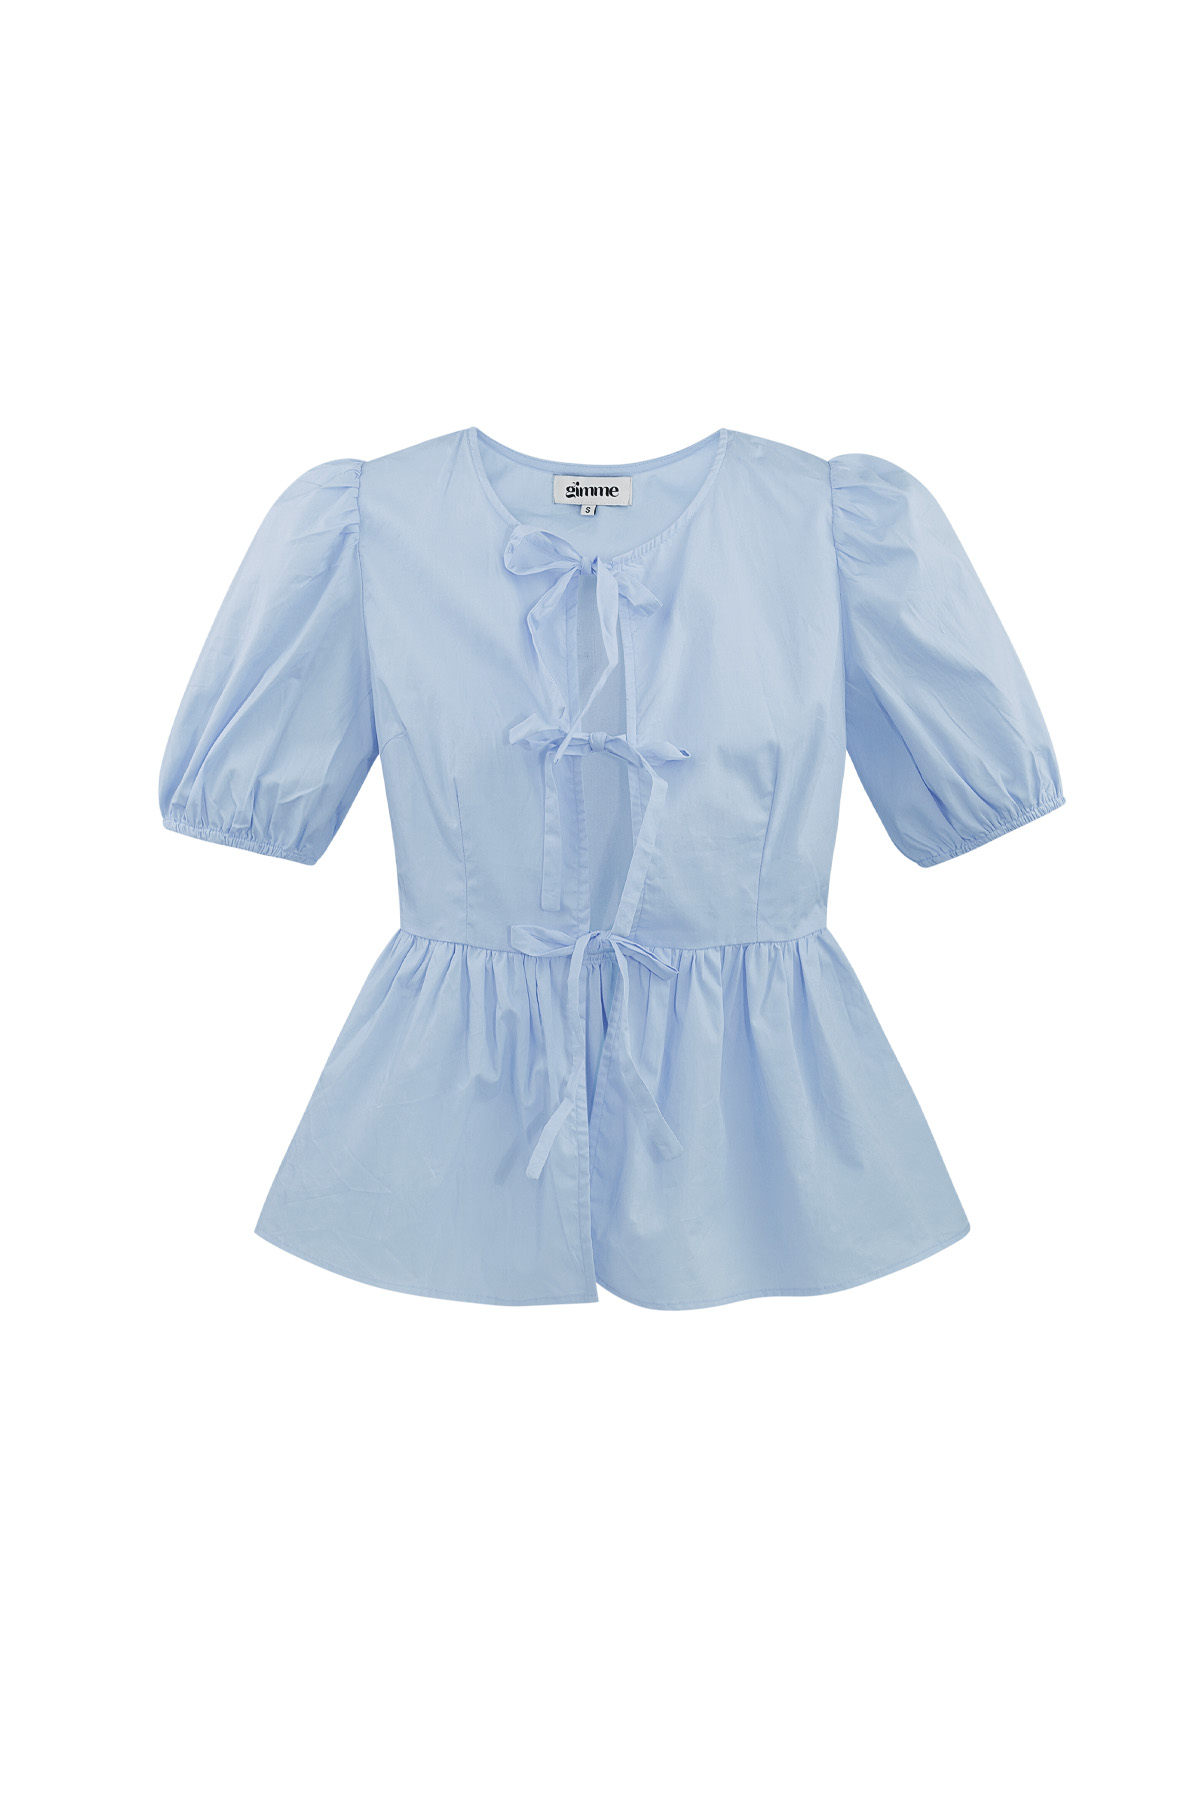 Must-have peplum blouse with bows - light blue